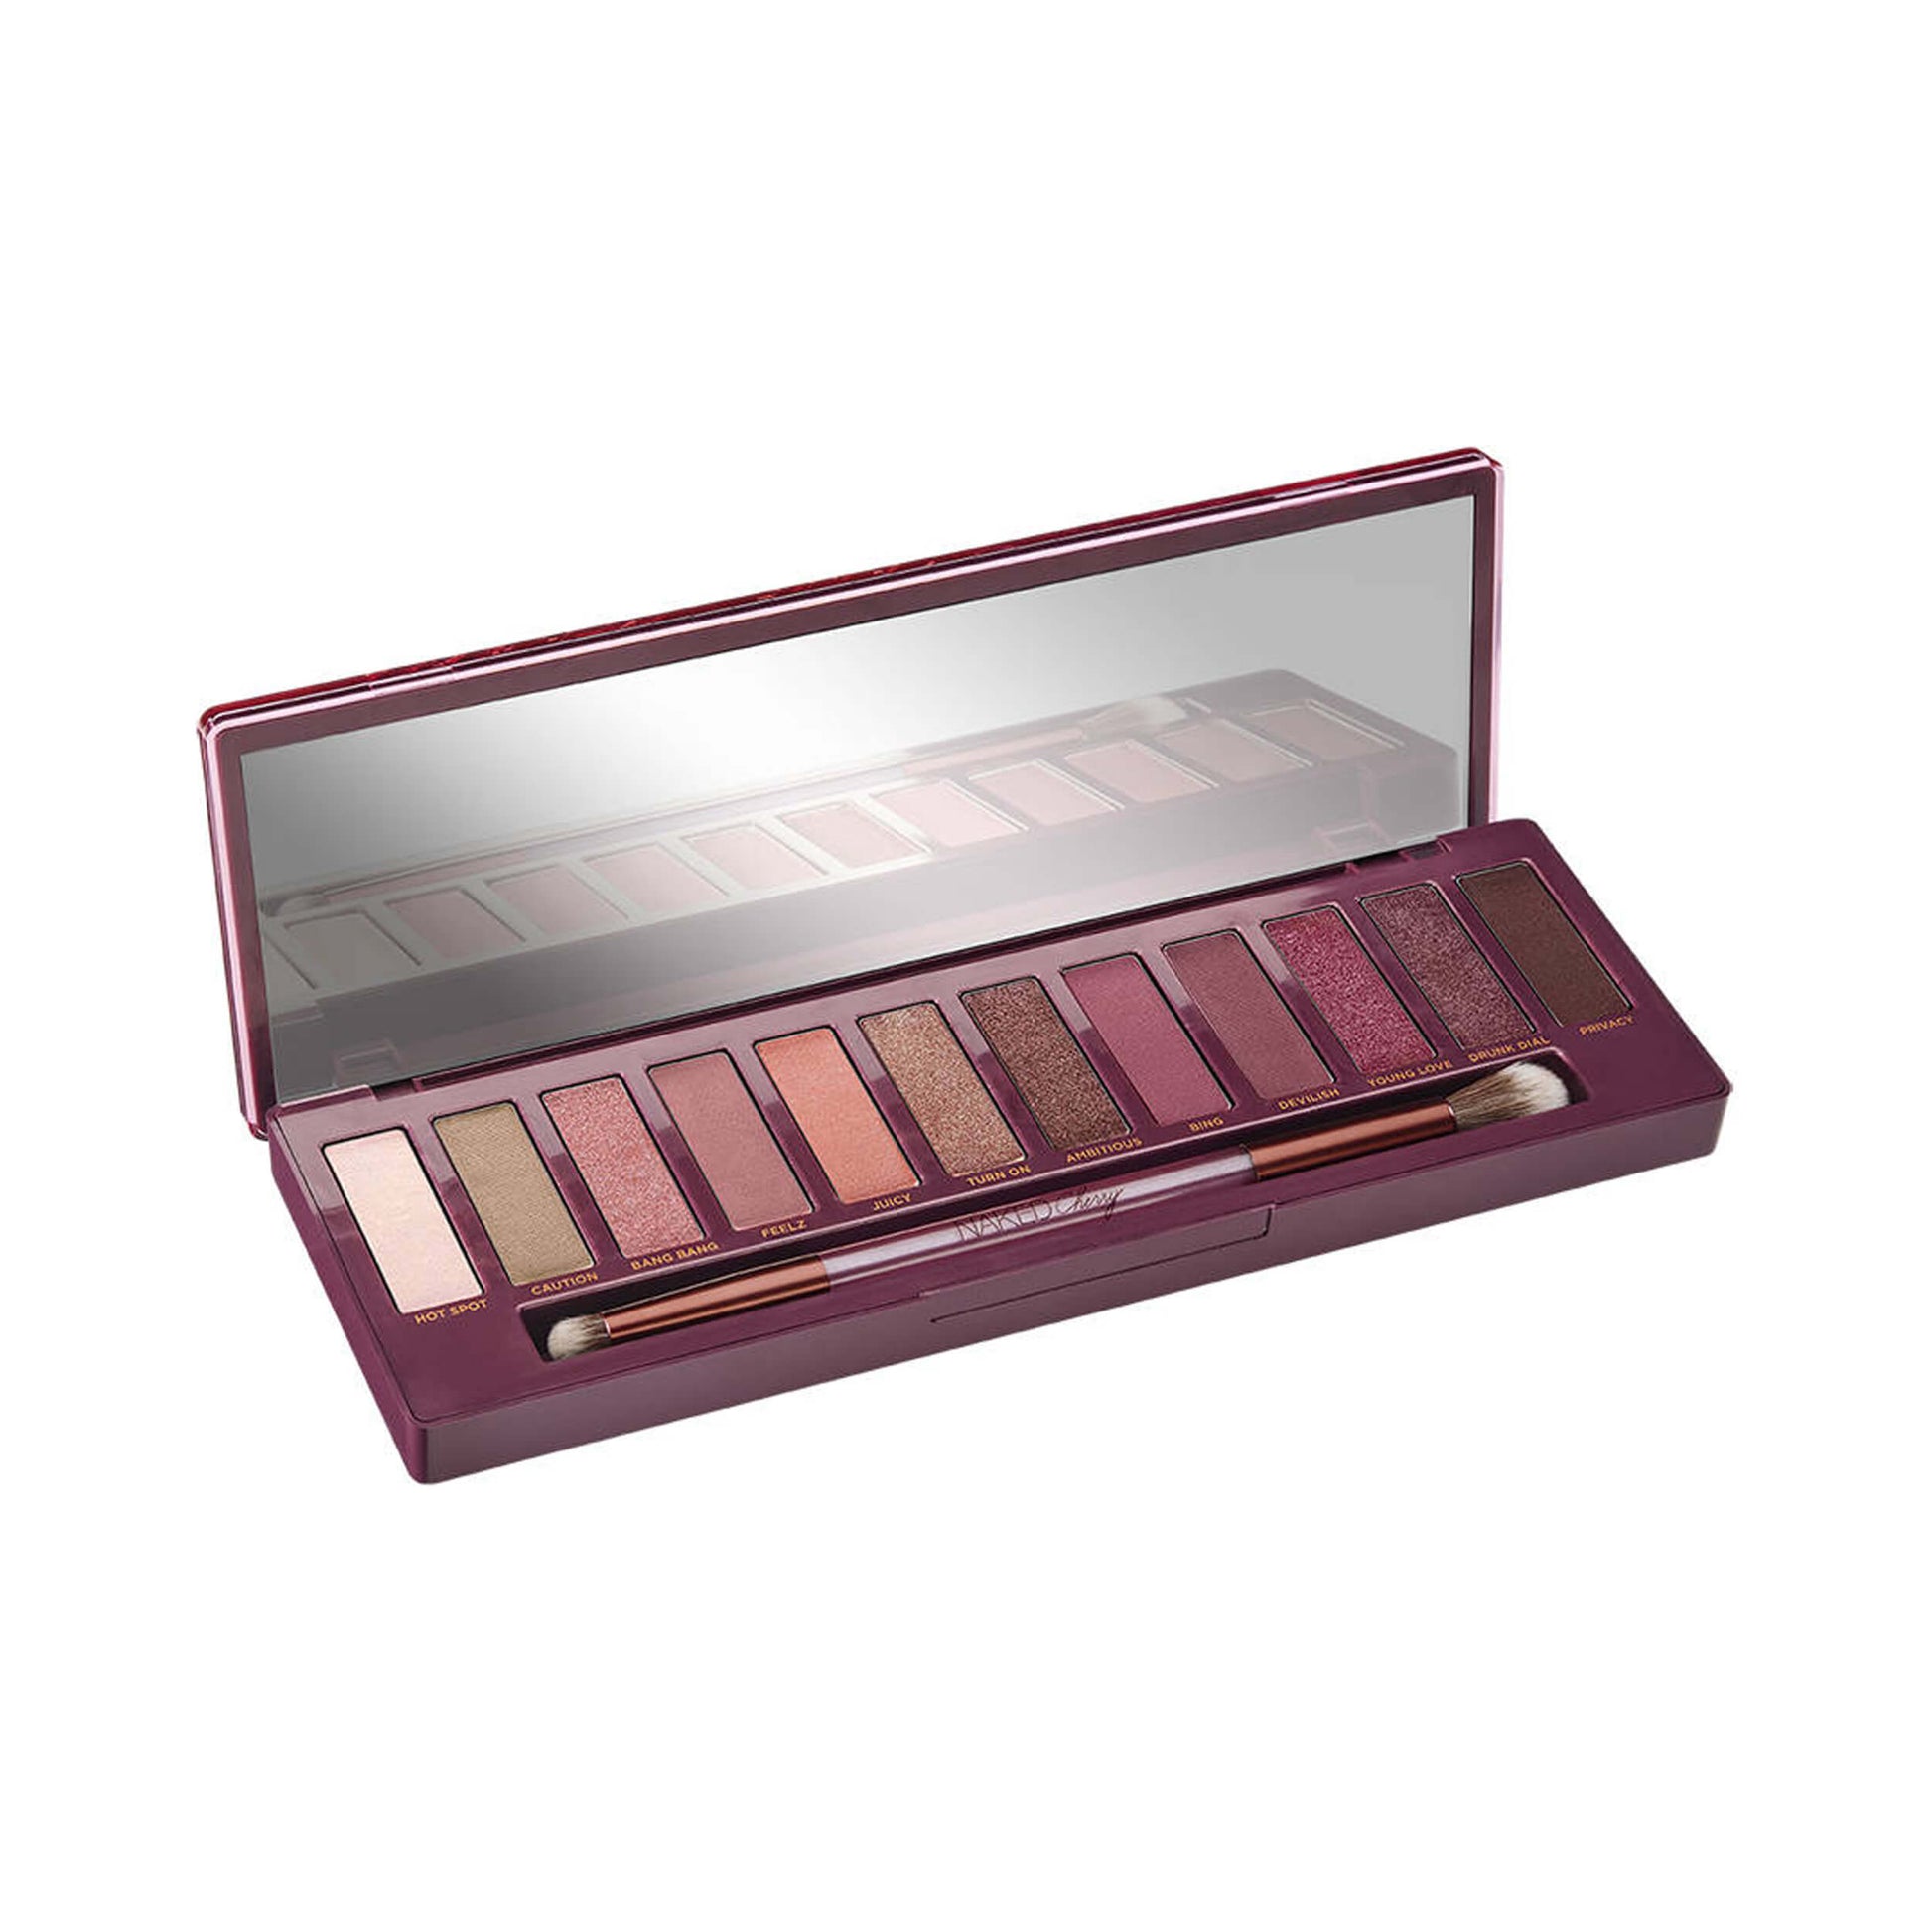 Urban Decay Naked Cherry Eyeshadow Palette Open